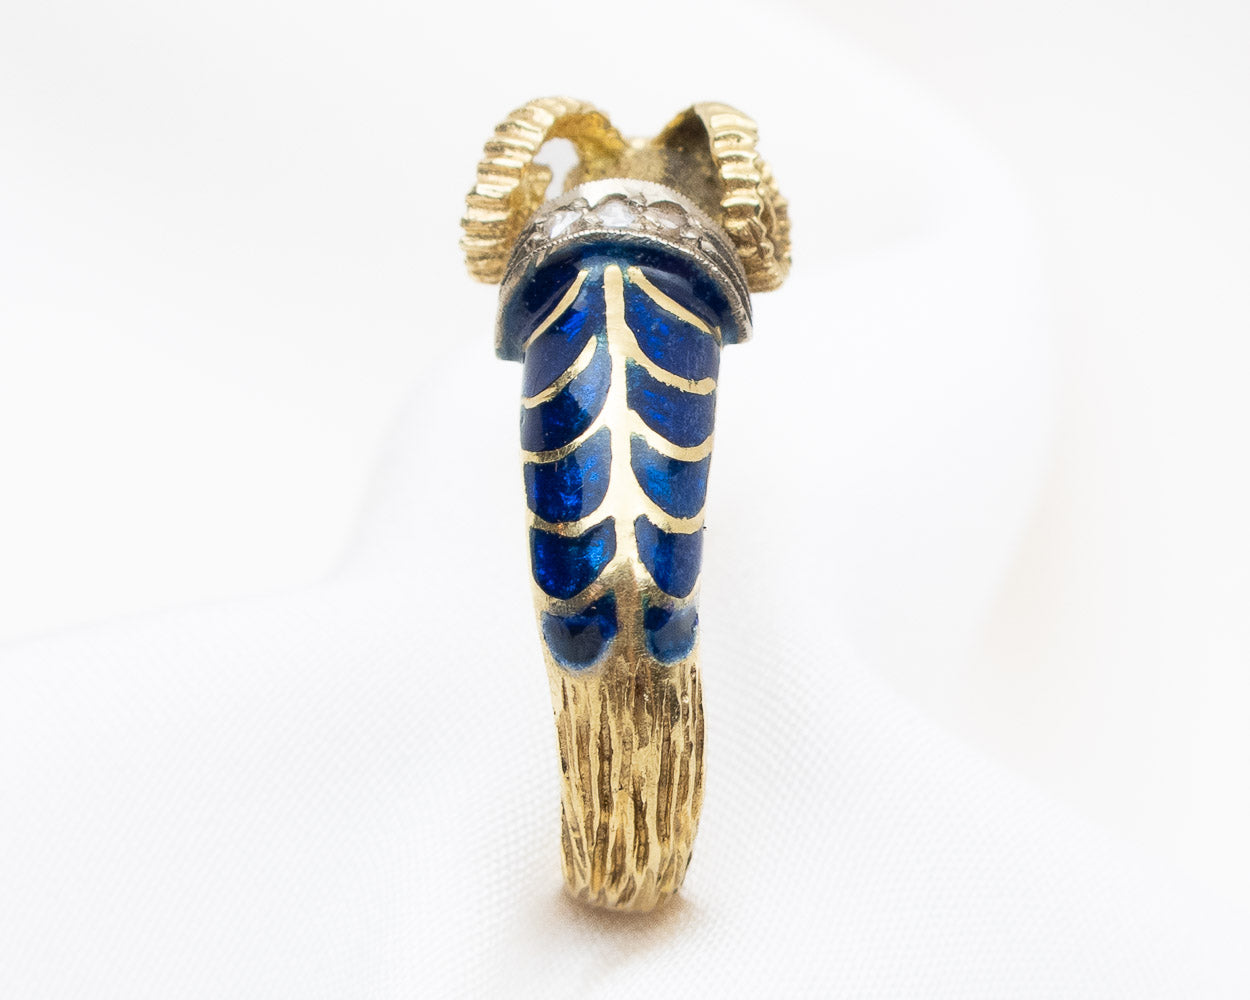 '60s Ram Ring with Enamel Details